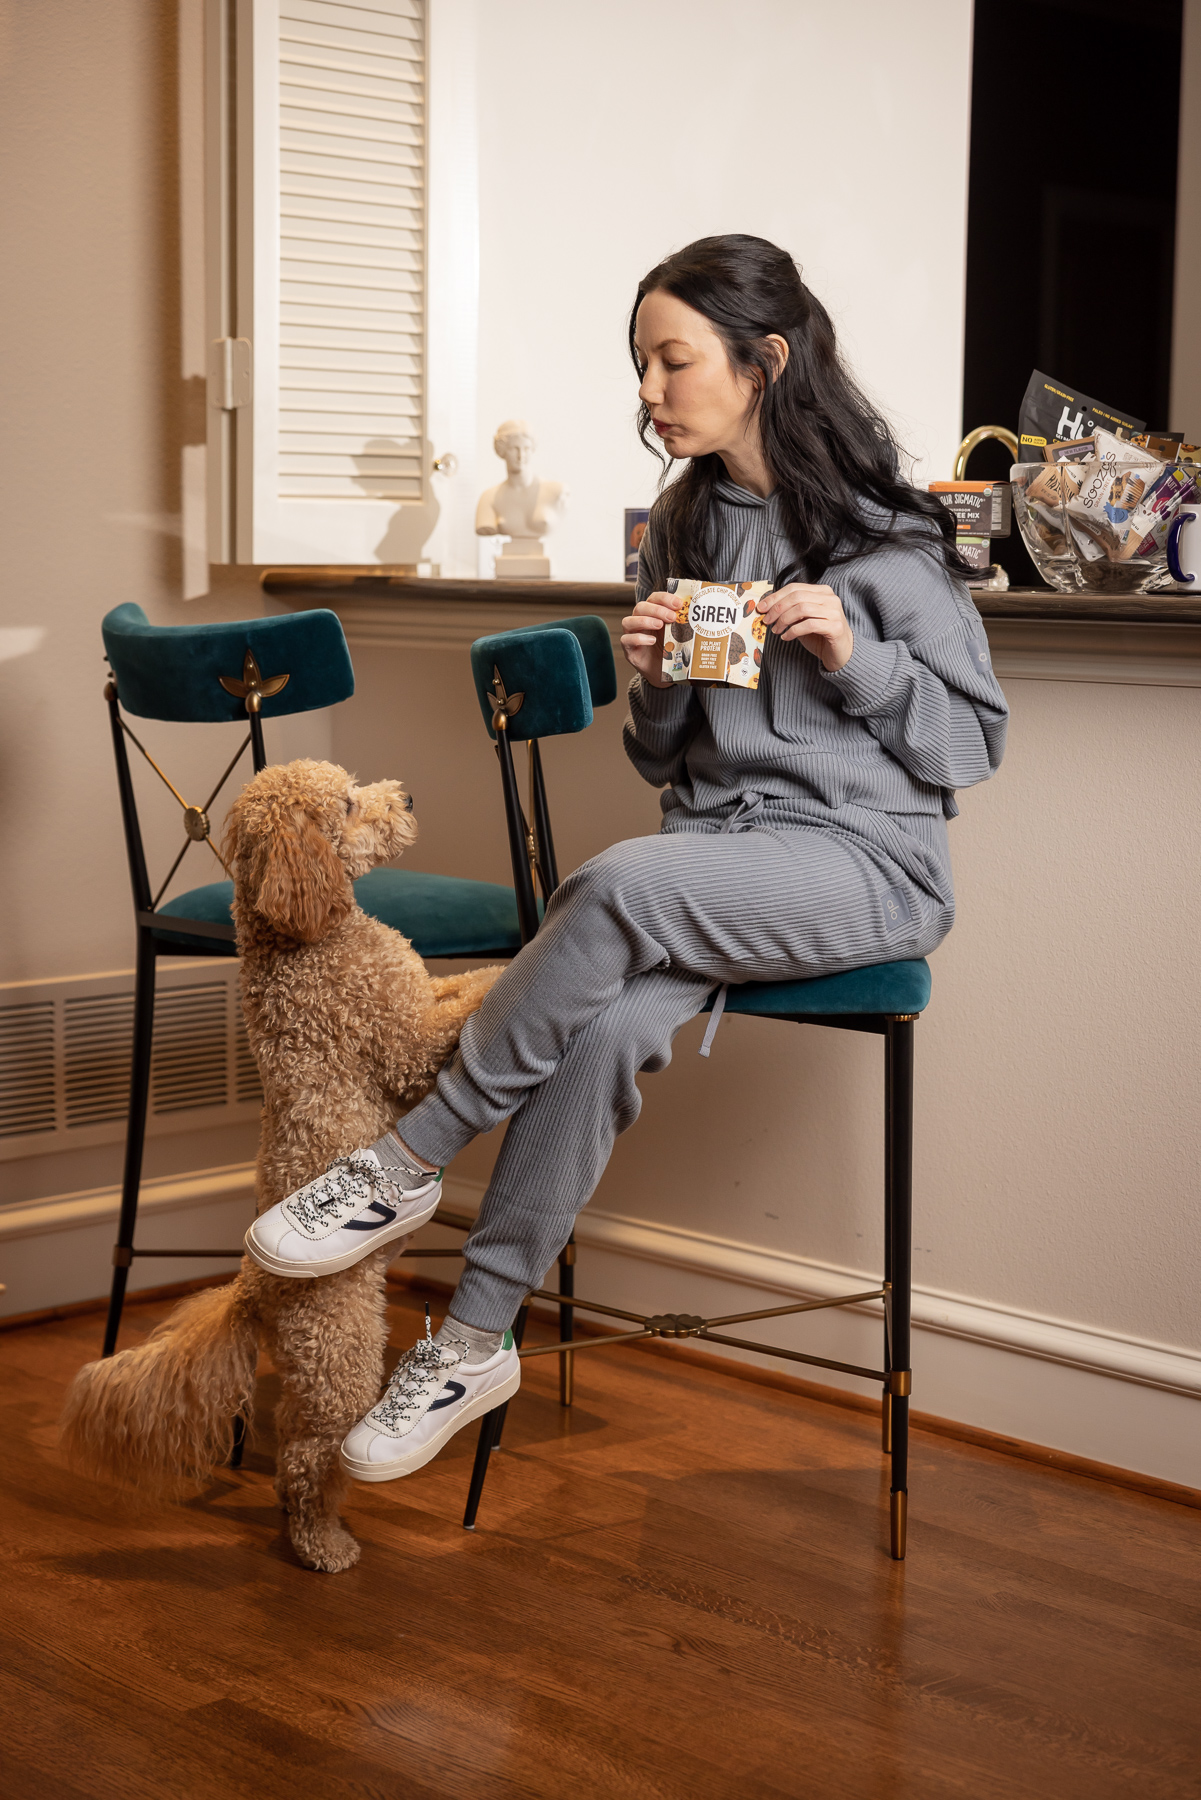 Dallas Home Interior, Alo Yoga Muse Hoodie and Sweatpant Set, Adaptogens, Healthy Snacks, Home Update, Mini Goldendoodle Puppy, Jonathan Adler Rider Counter Stools, Home Bar, Yappy.com custom mug 